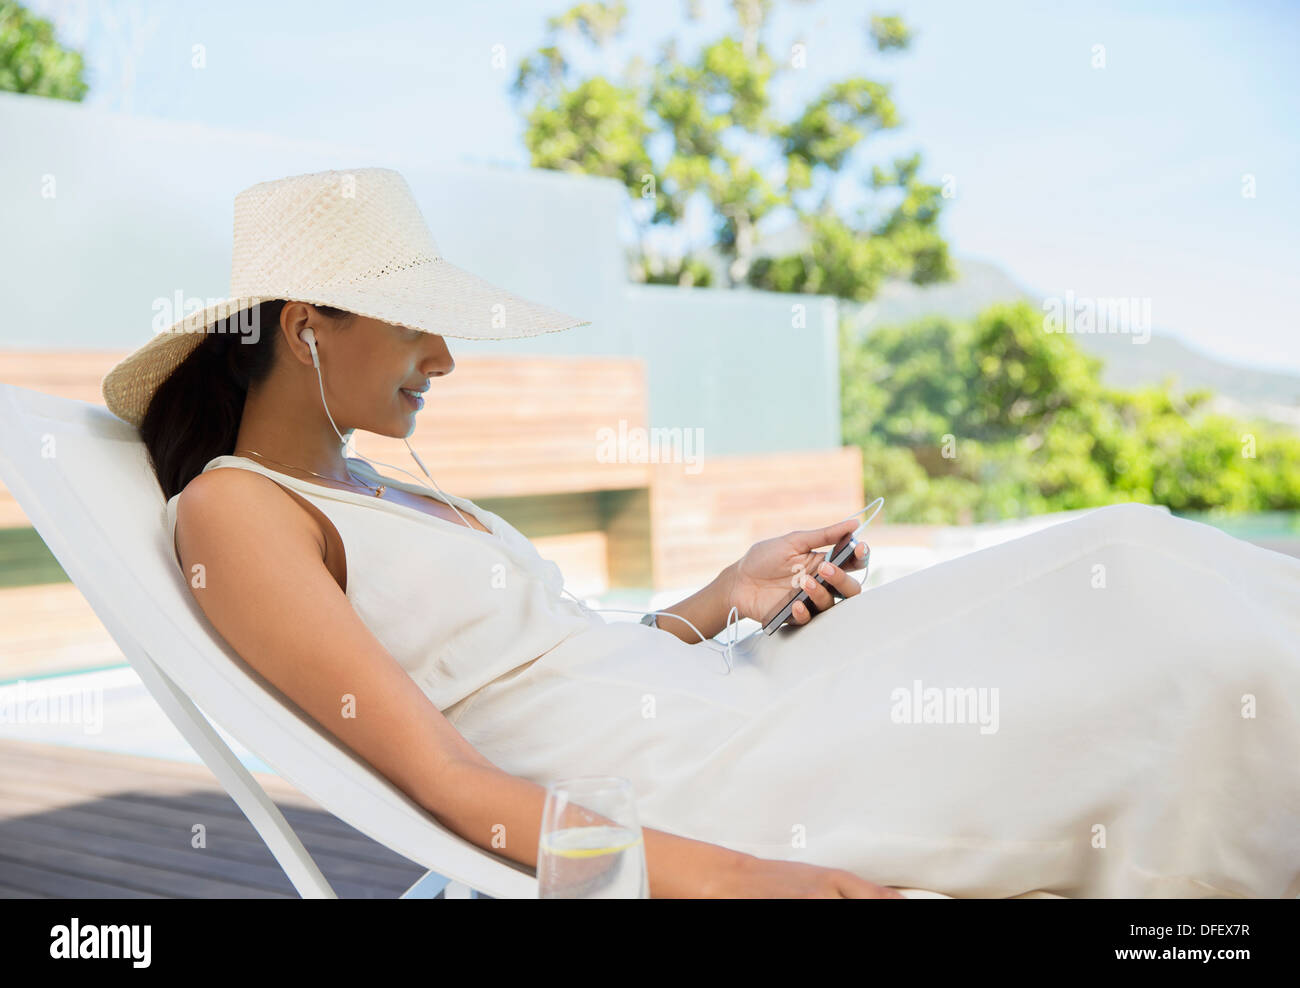 Woman listening to mp3 player outdoors Stock Photo